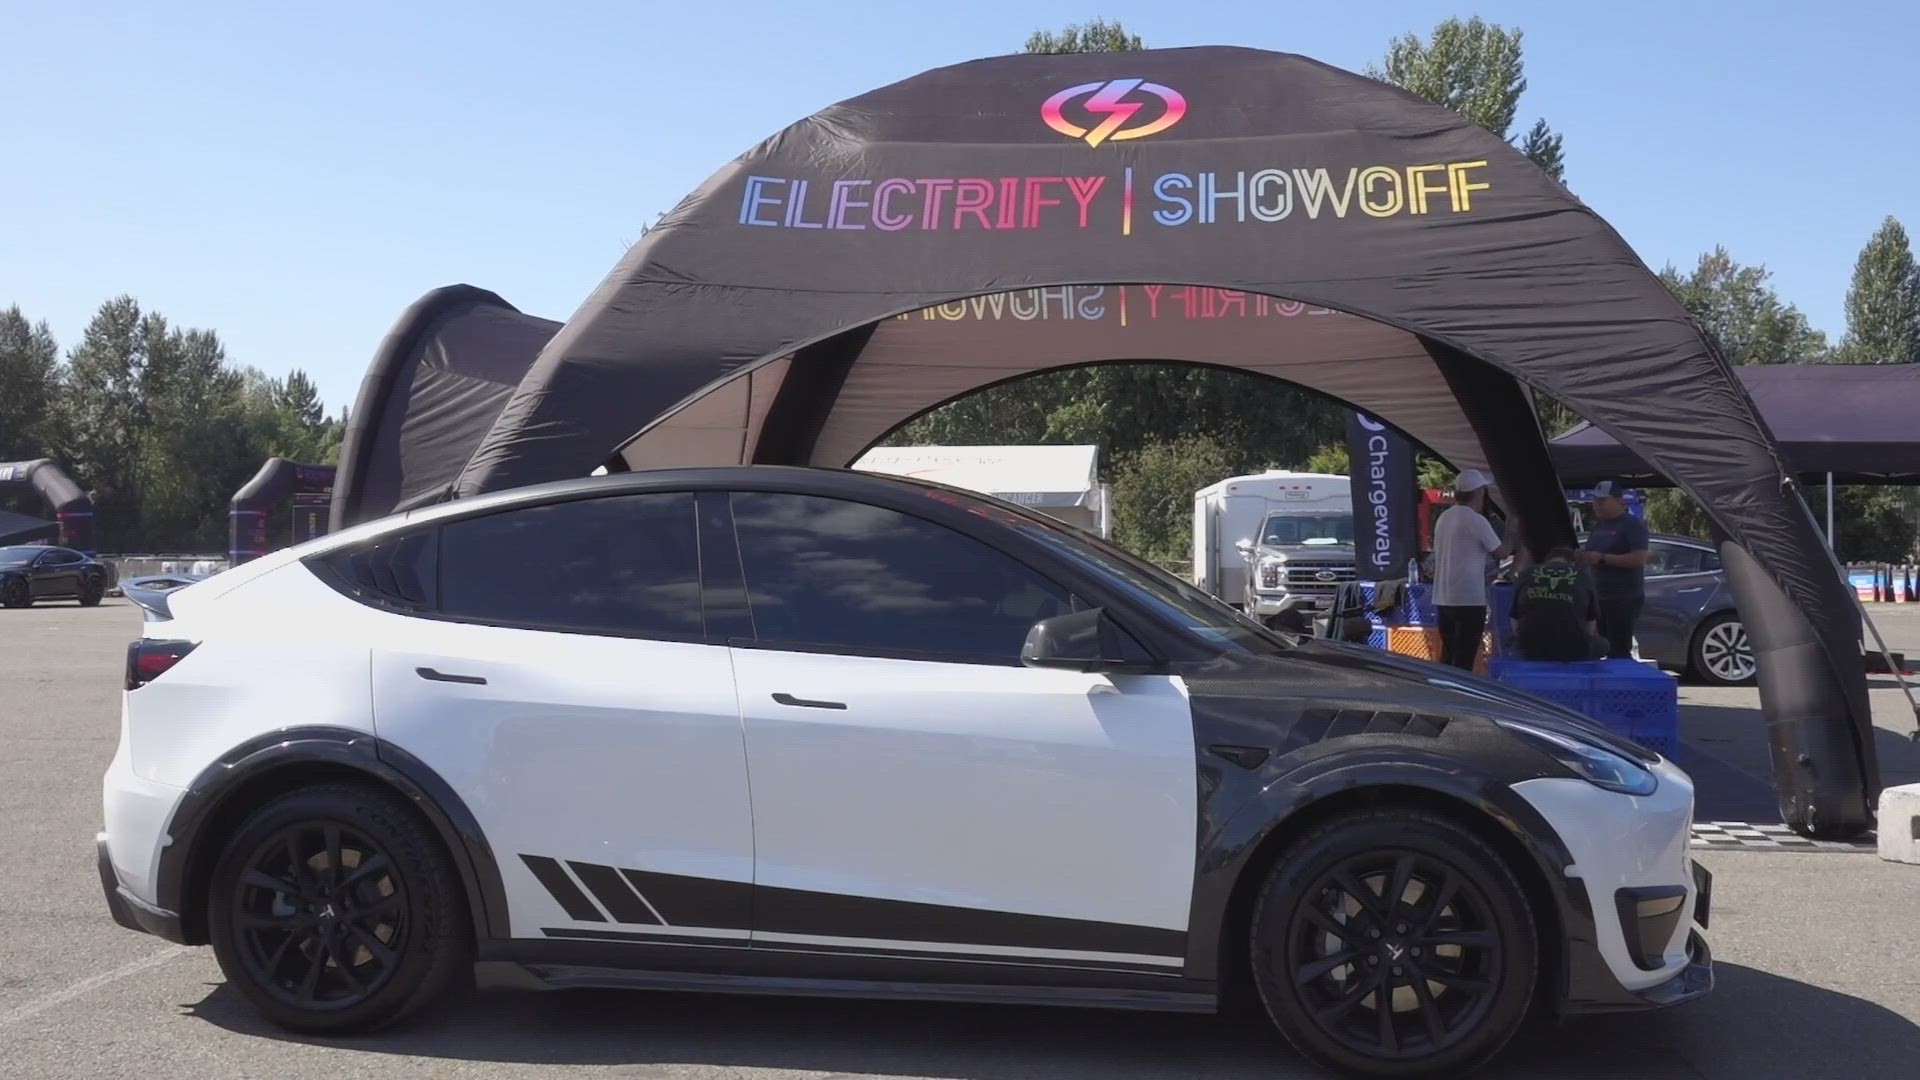 North America's largest electric vehicle festival is in Redmond